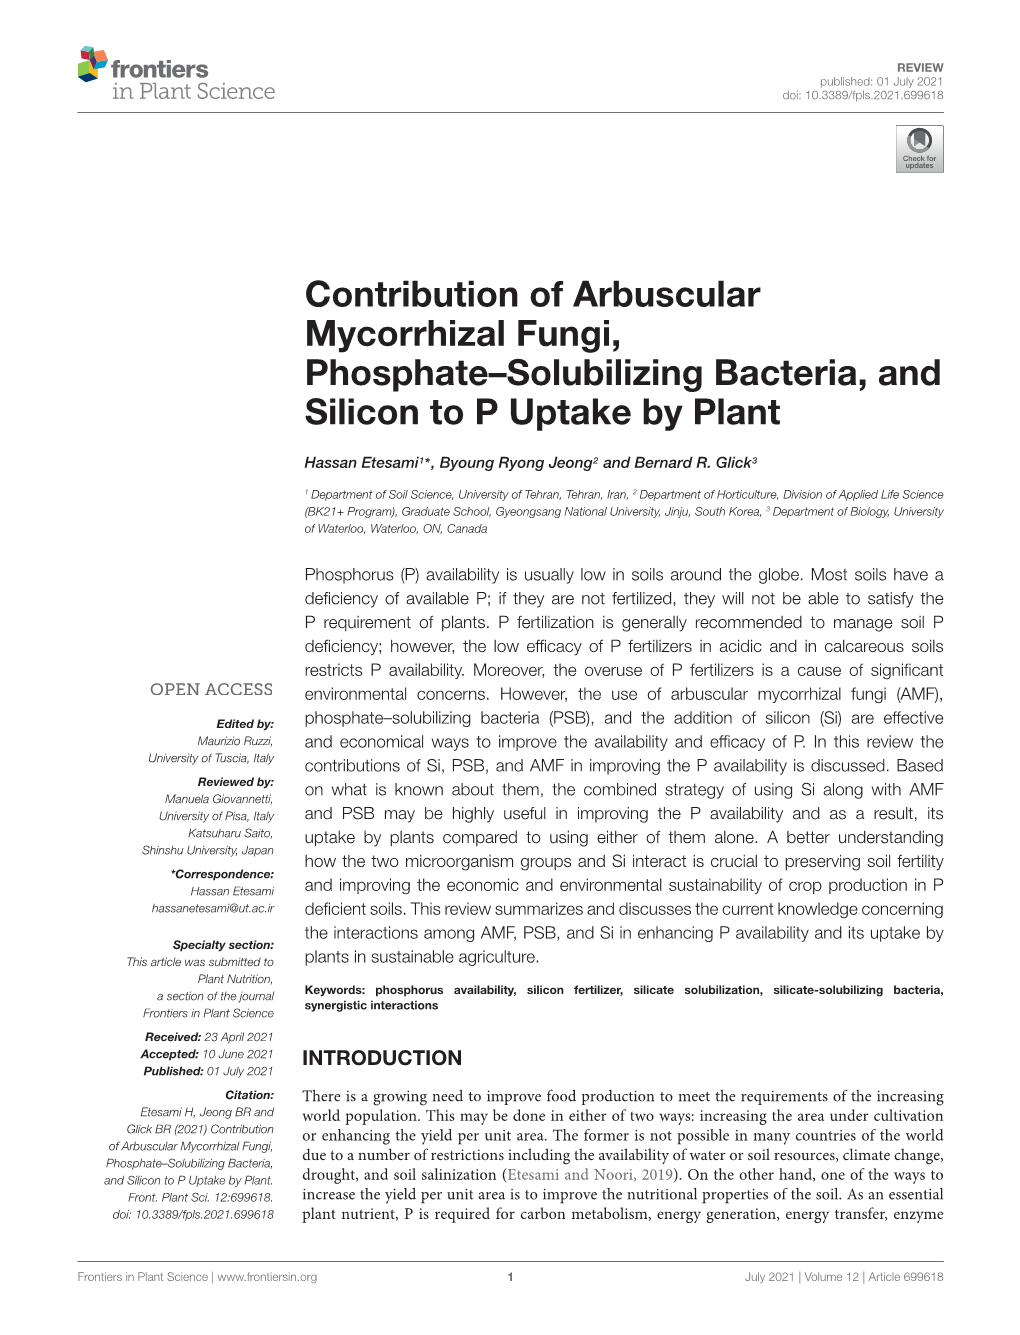 Contribution of Arbuscular Mycorrhizal Fungi, Phosphate–Solubilizing Bacteria, and Silicon to P Uptake by Plant